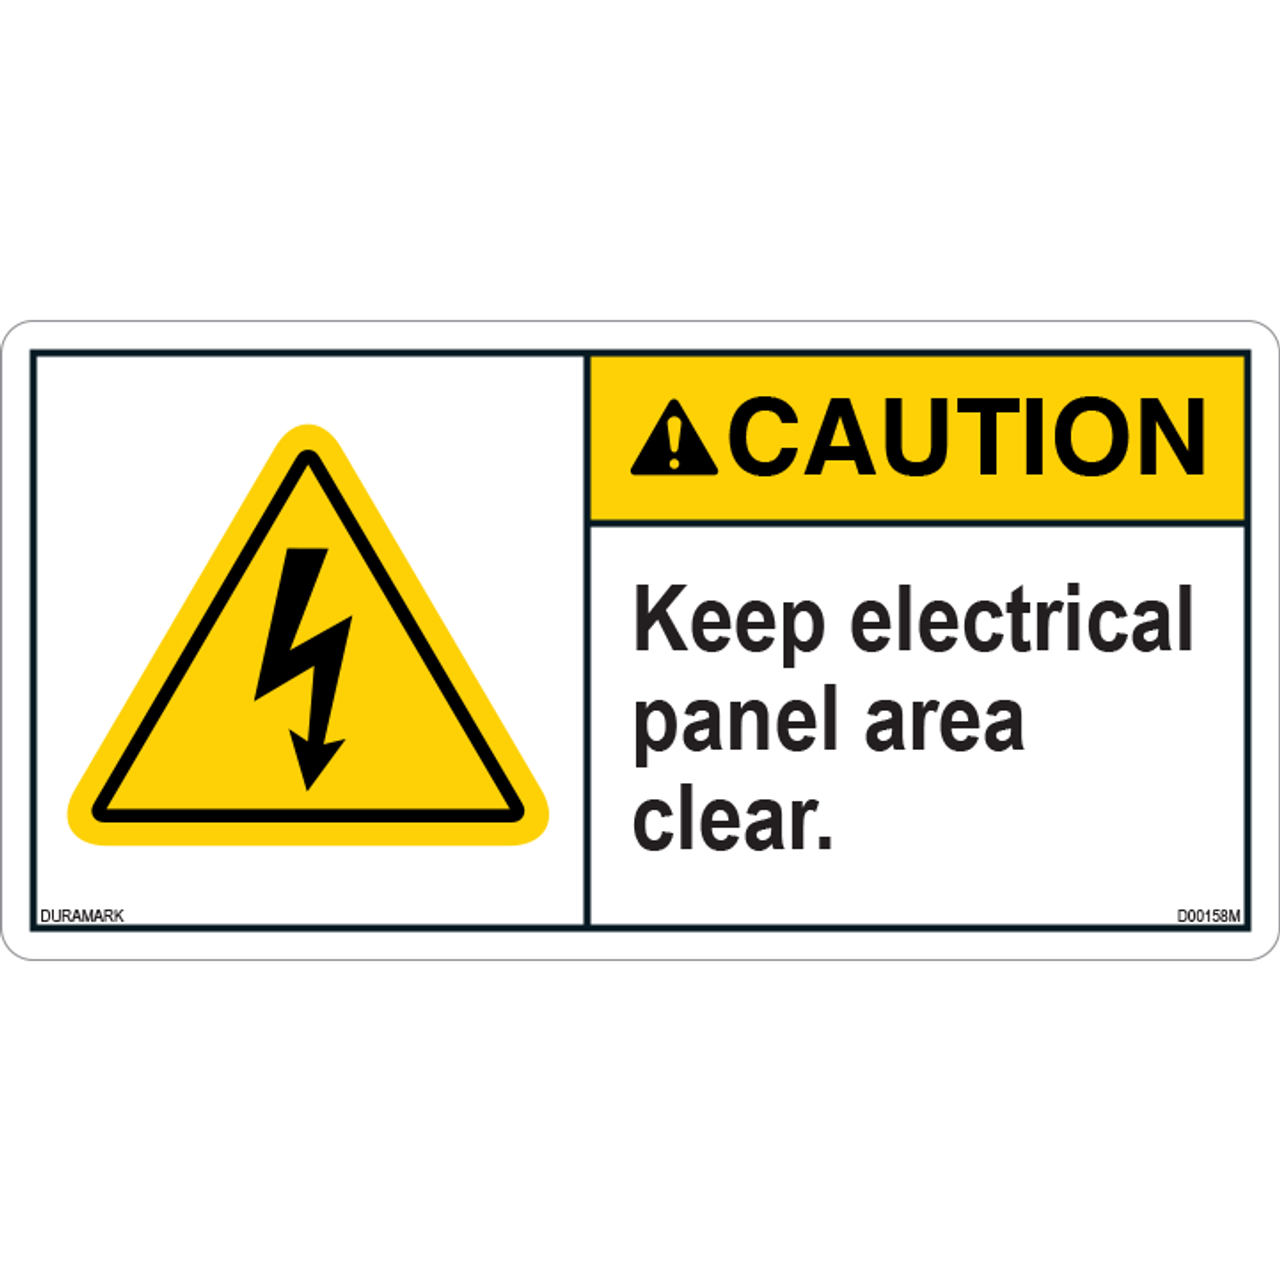 ANSI Safety Label - Caution - Electrical Safety - Keep Panel Clear